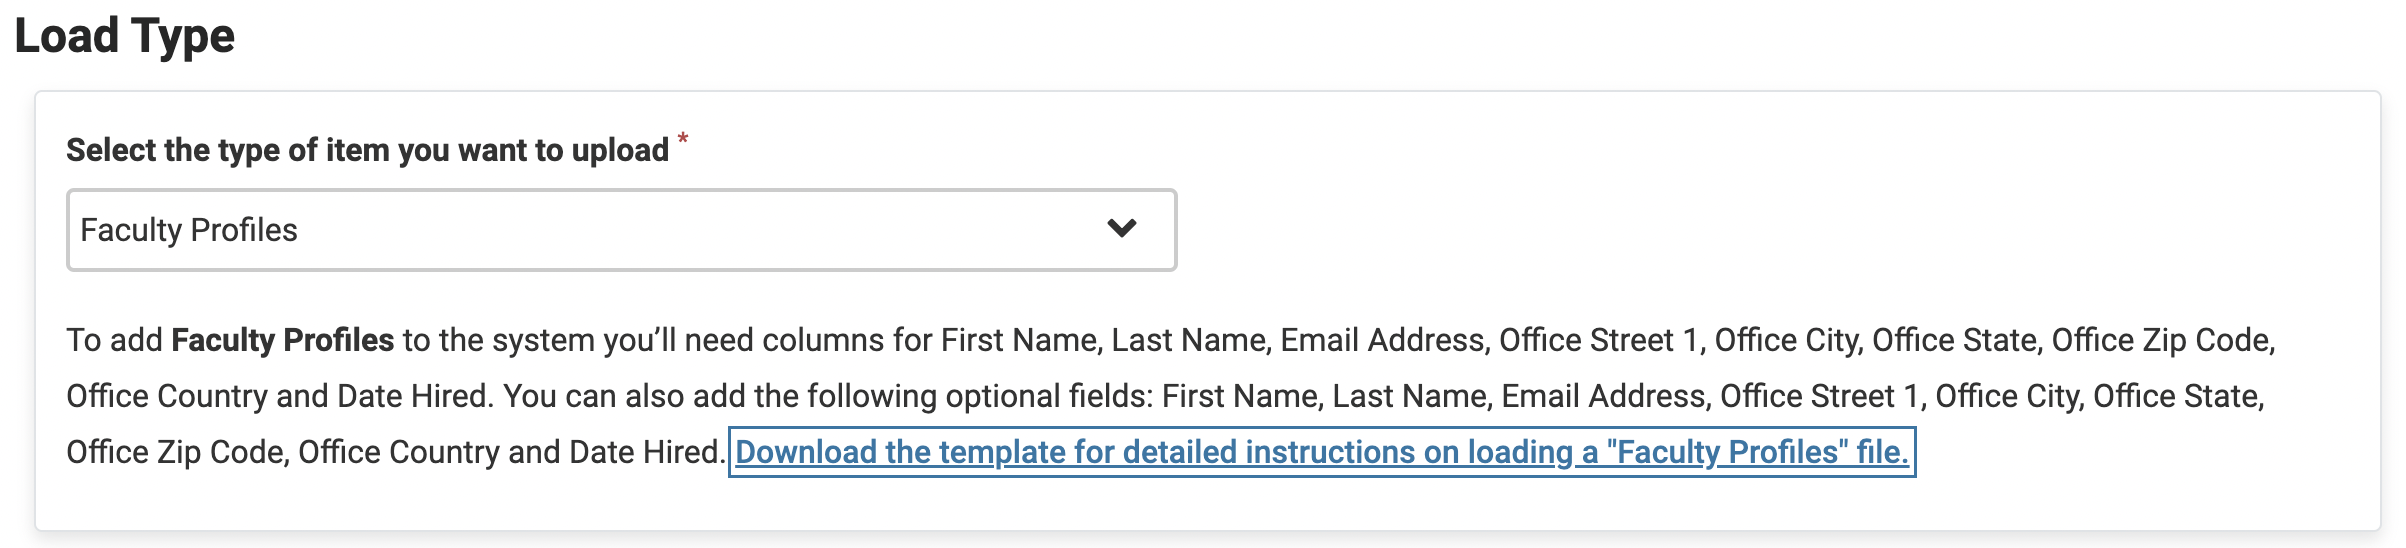 Load Type section with Faculty Profiles selected and the Download the template for detailed instructions on loading a "Faculty Profiles" file link selected